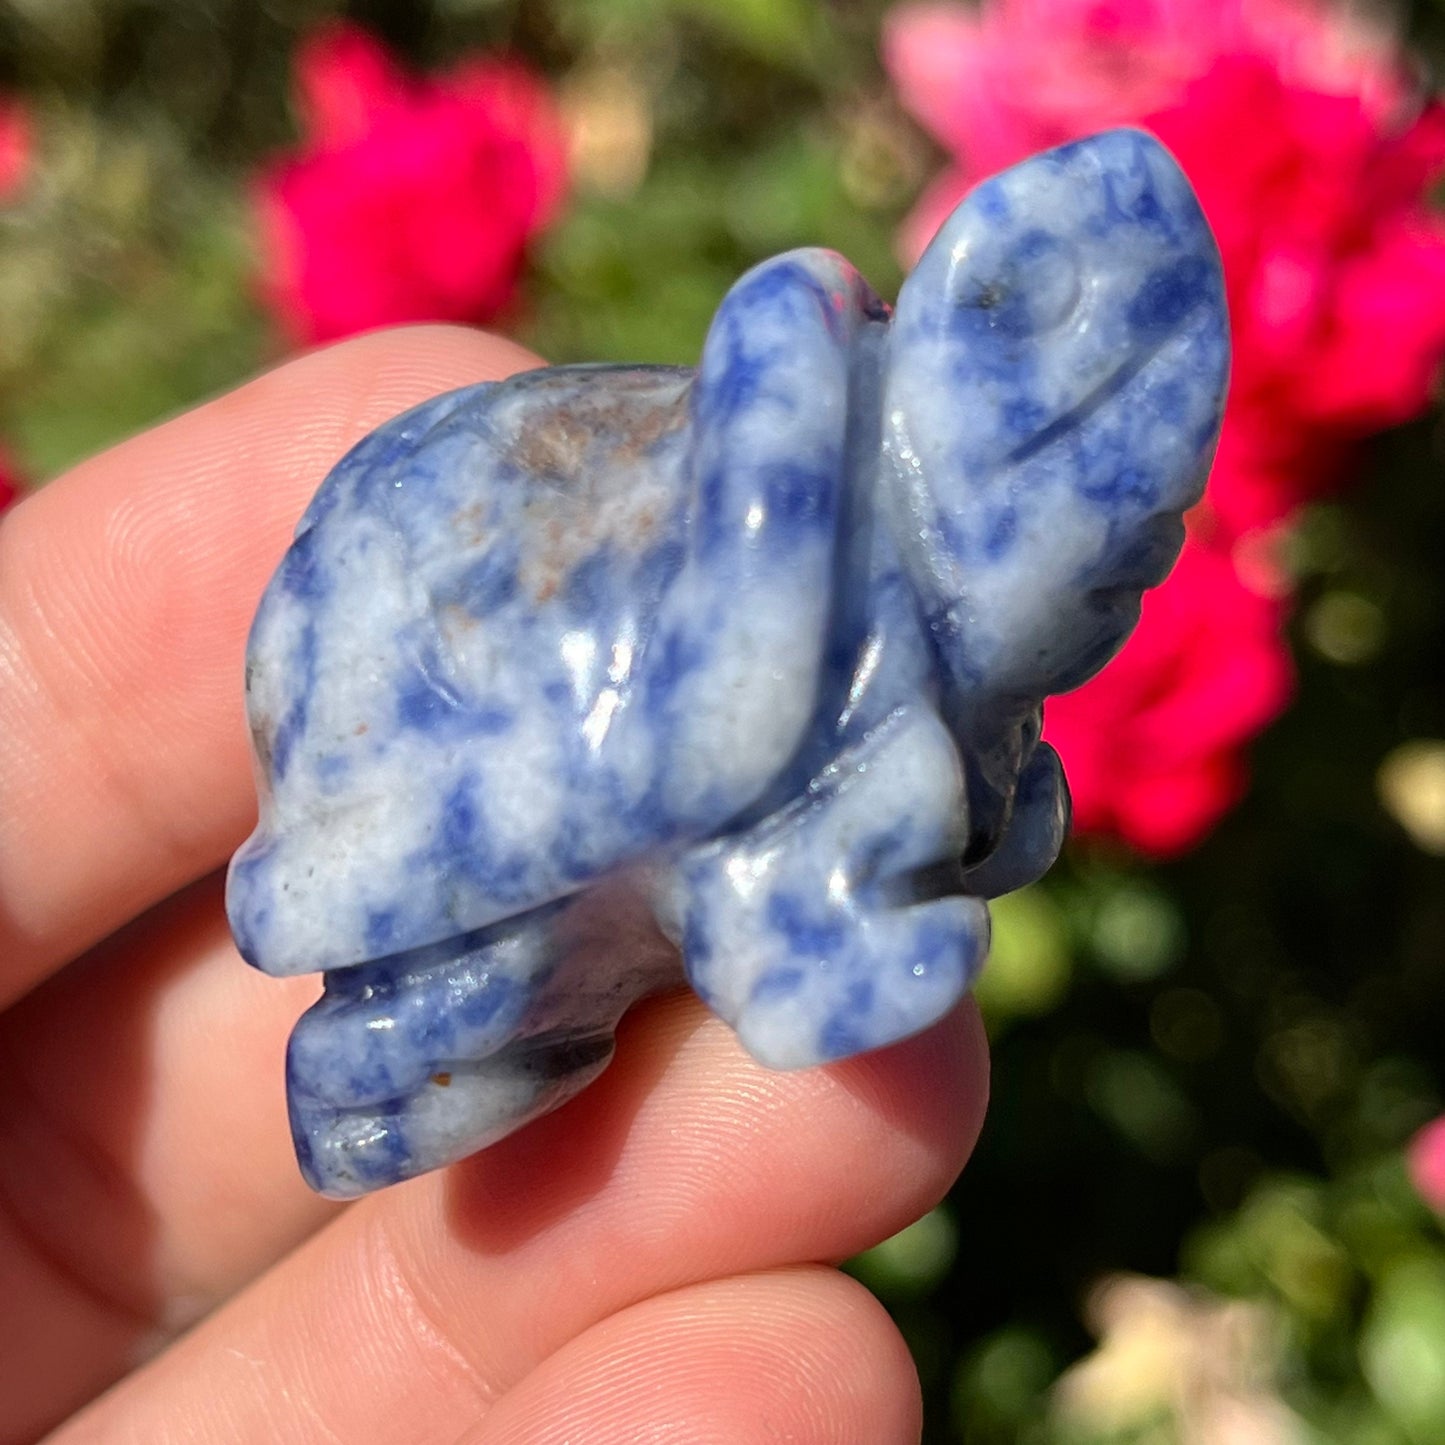 Genuine Stone Crystal Turtle Carving Natural Polished Carved Minerals Crystals ~ Stone Carved